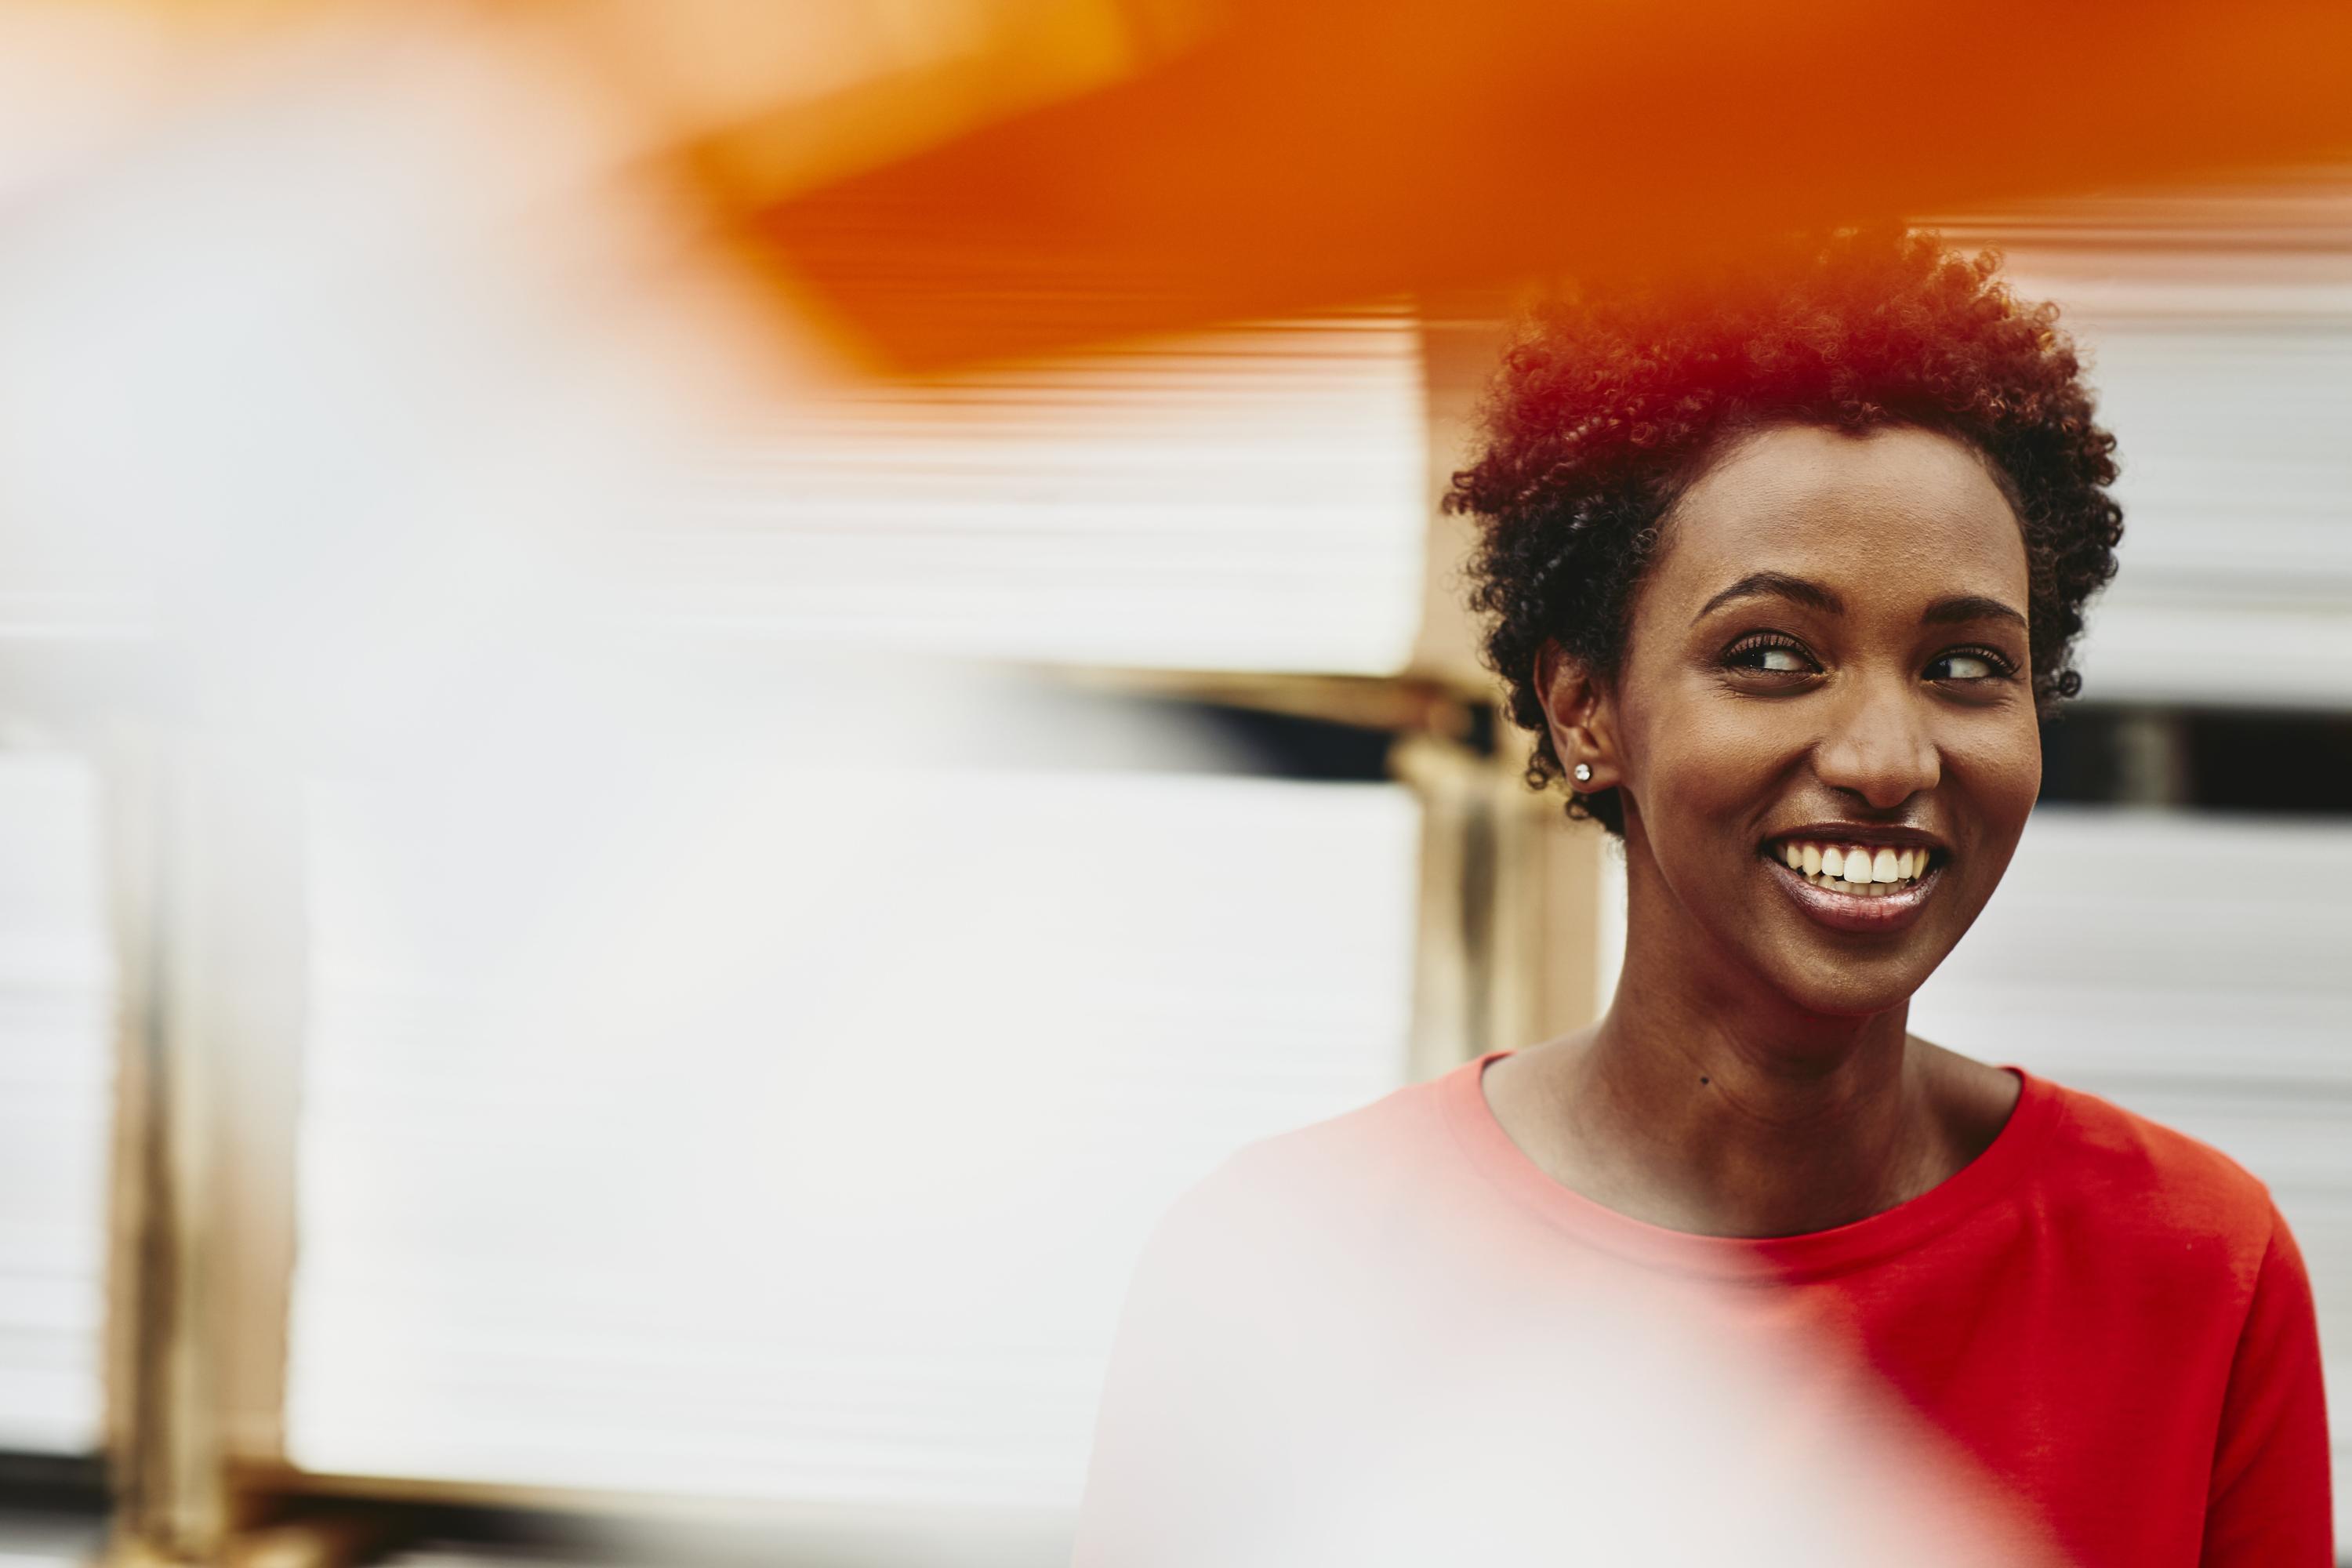 Female African-American worker. Lauging. Primary color orange. Secondary colors white/cream and red.